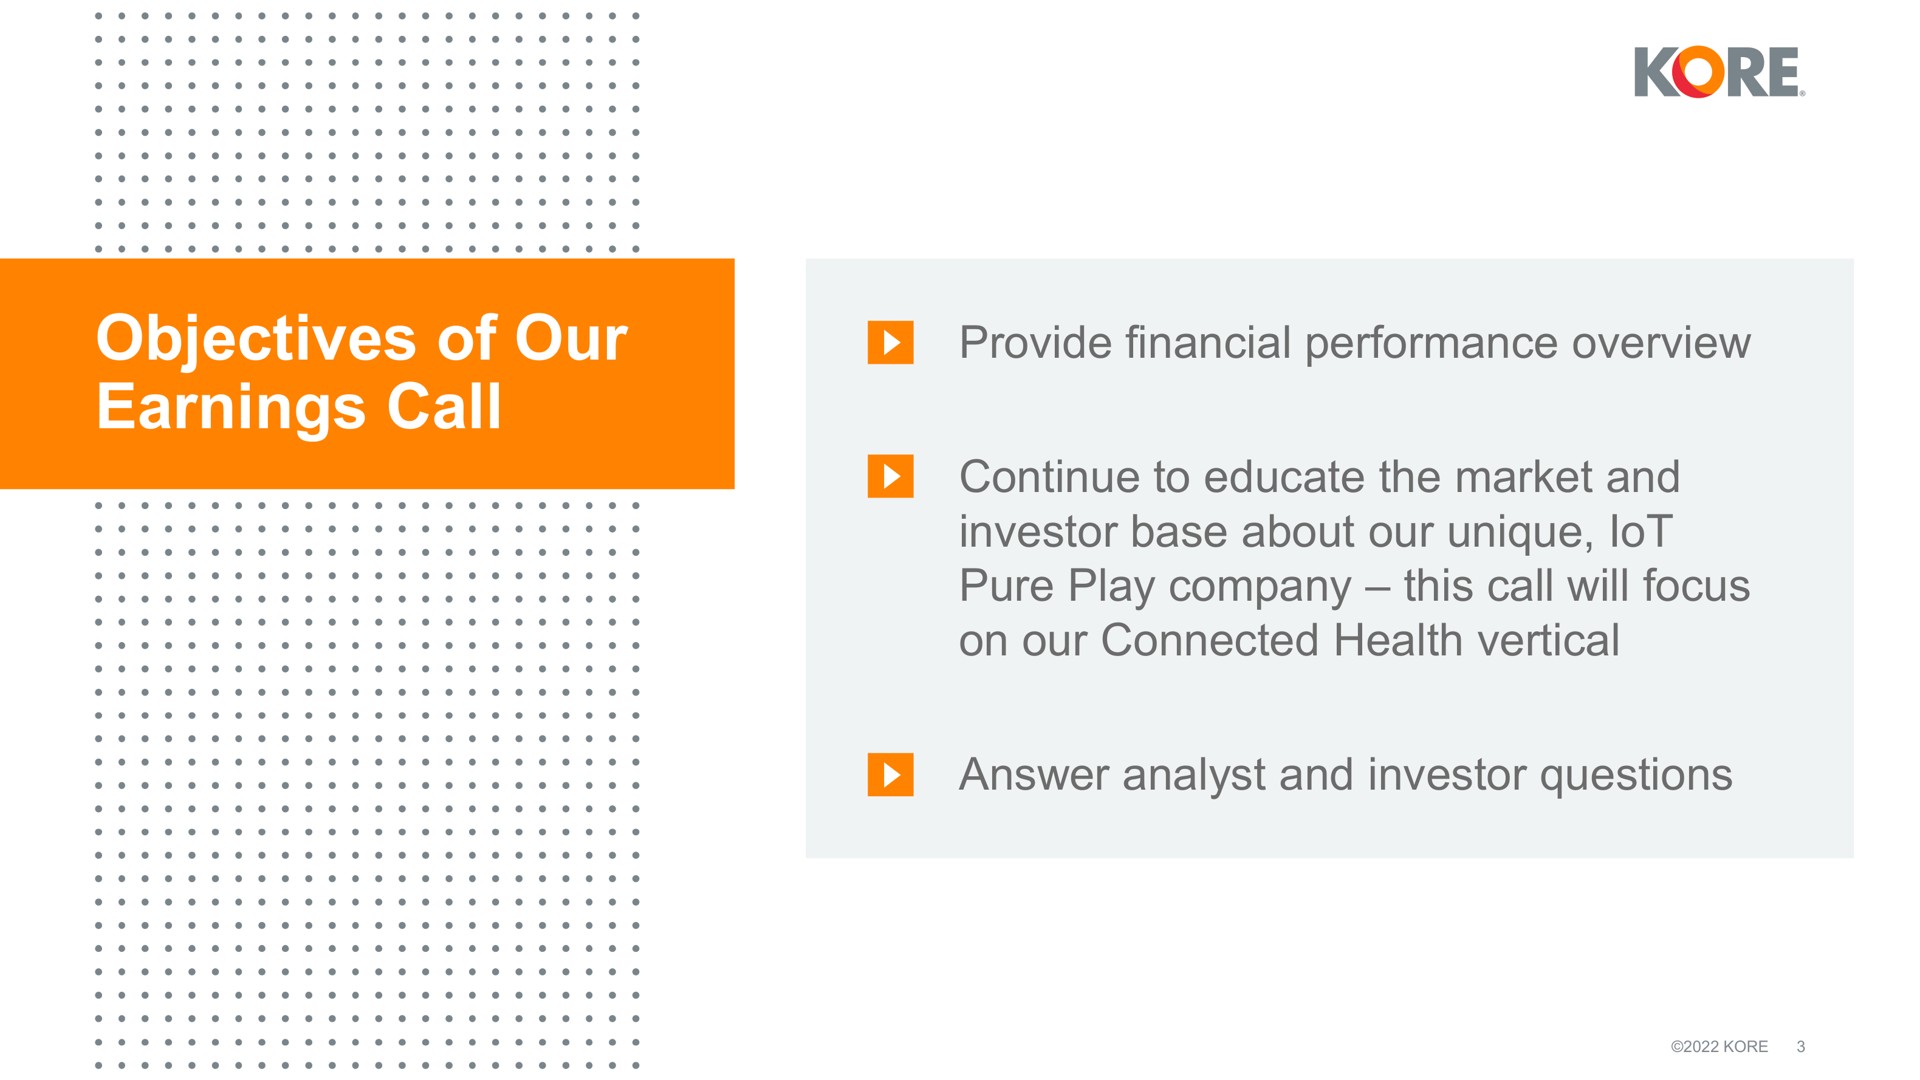 objectives of our earnings call provide financial performance overview continue to educate the market and investor base about our unique pure play company this call will focus on our connected health vertical answer analyst and investor questions kore lot loses | Kore